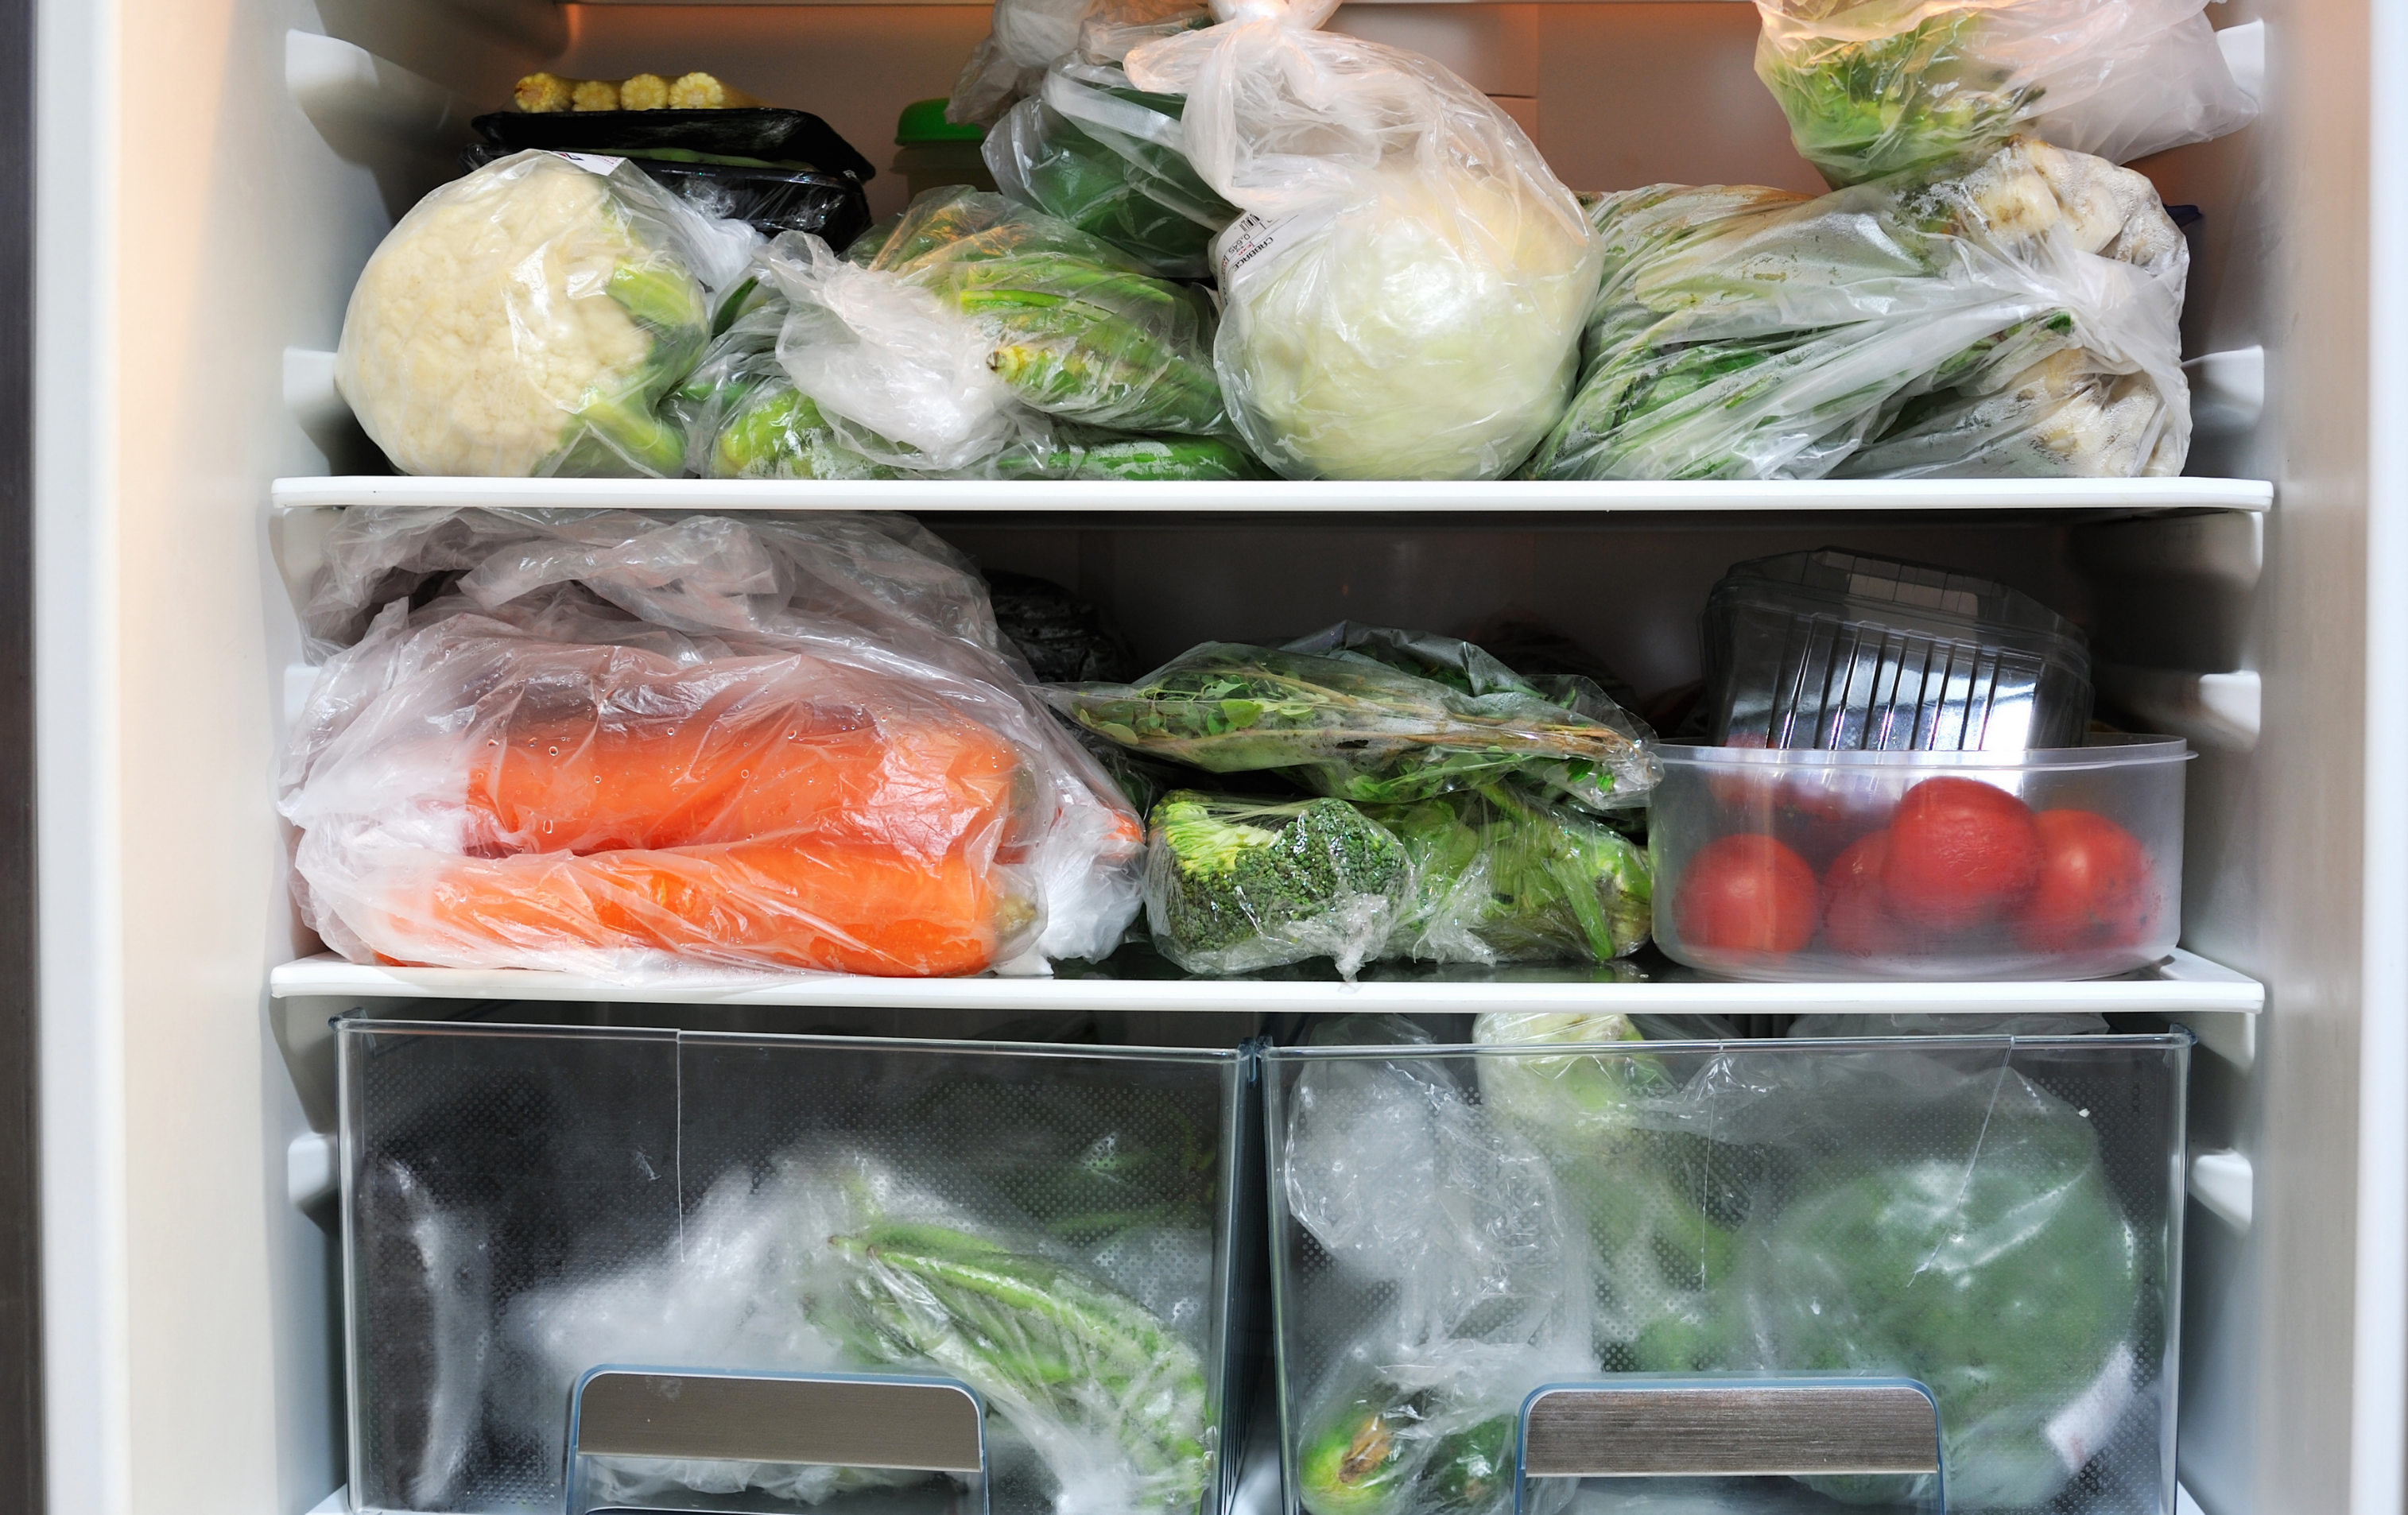 Inside of a fridge filled with produce.